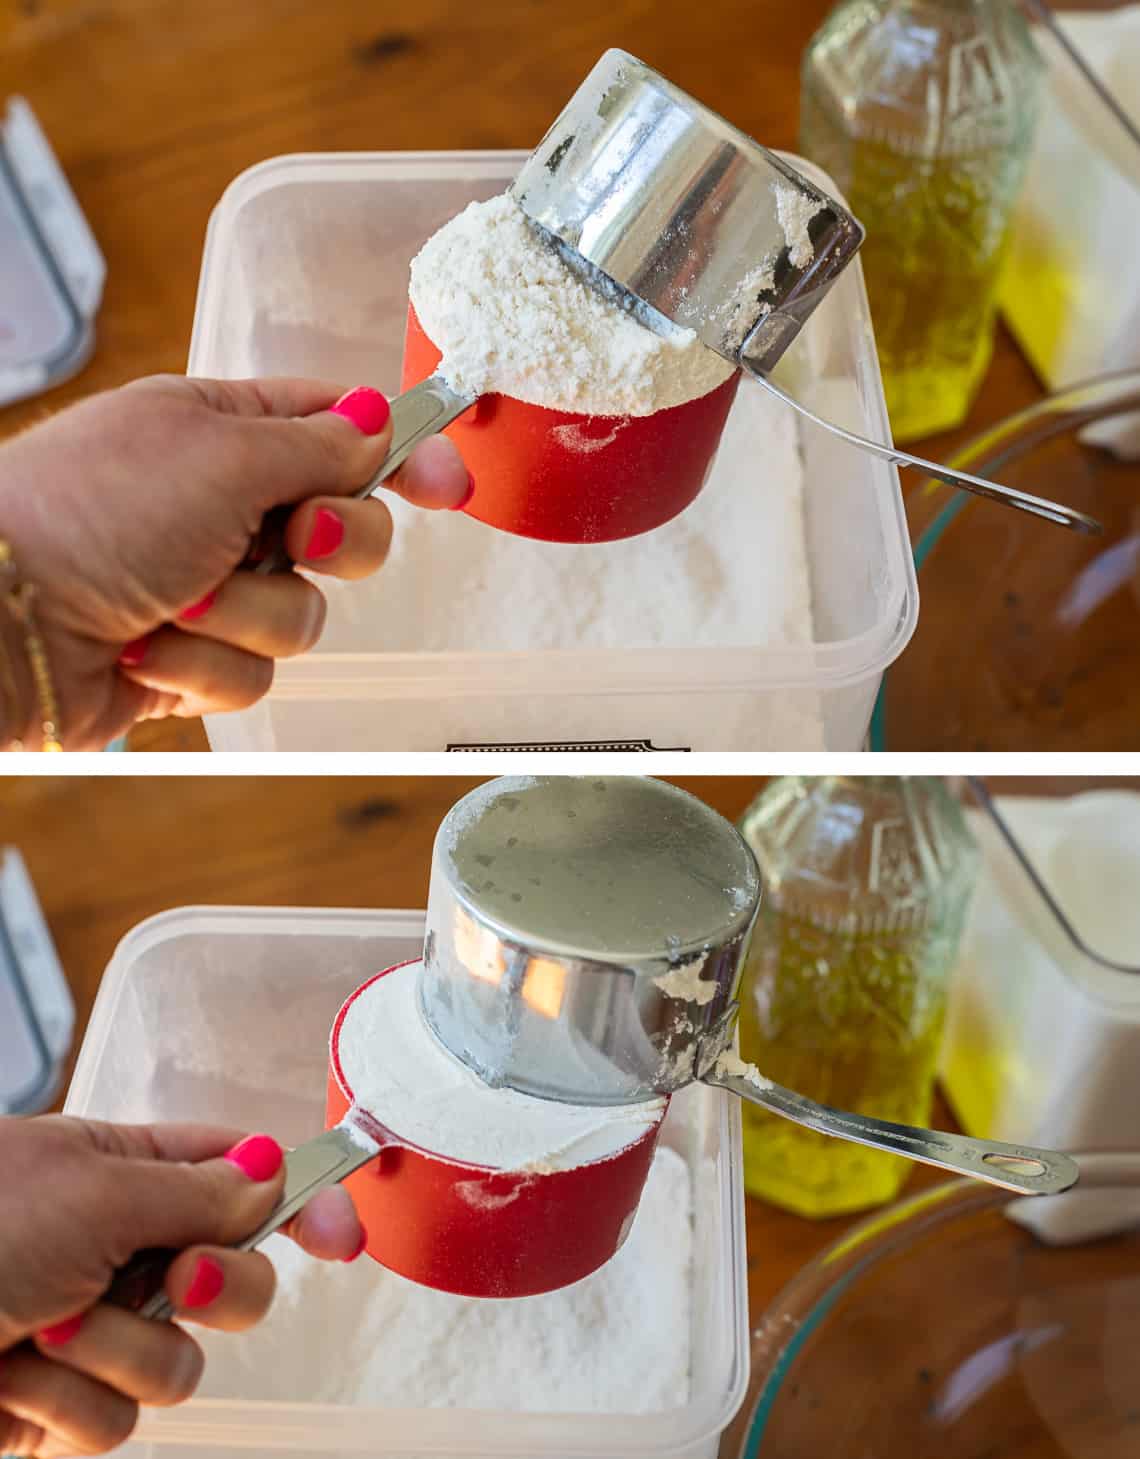 top, scooping flour into a measuring cup, bottom leveling the flour for accurate measuring.